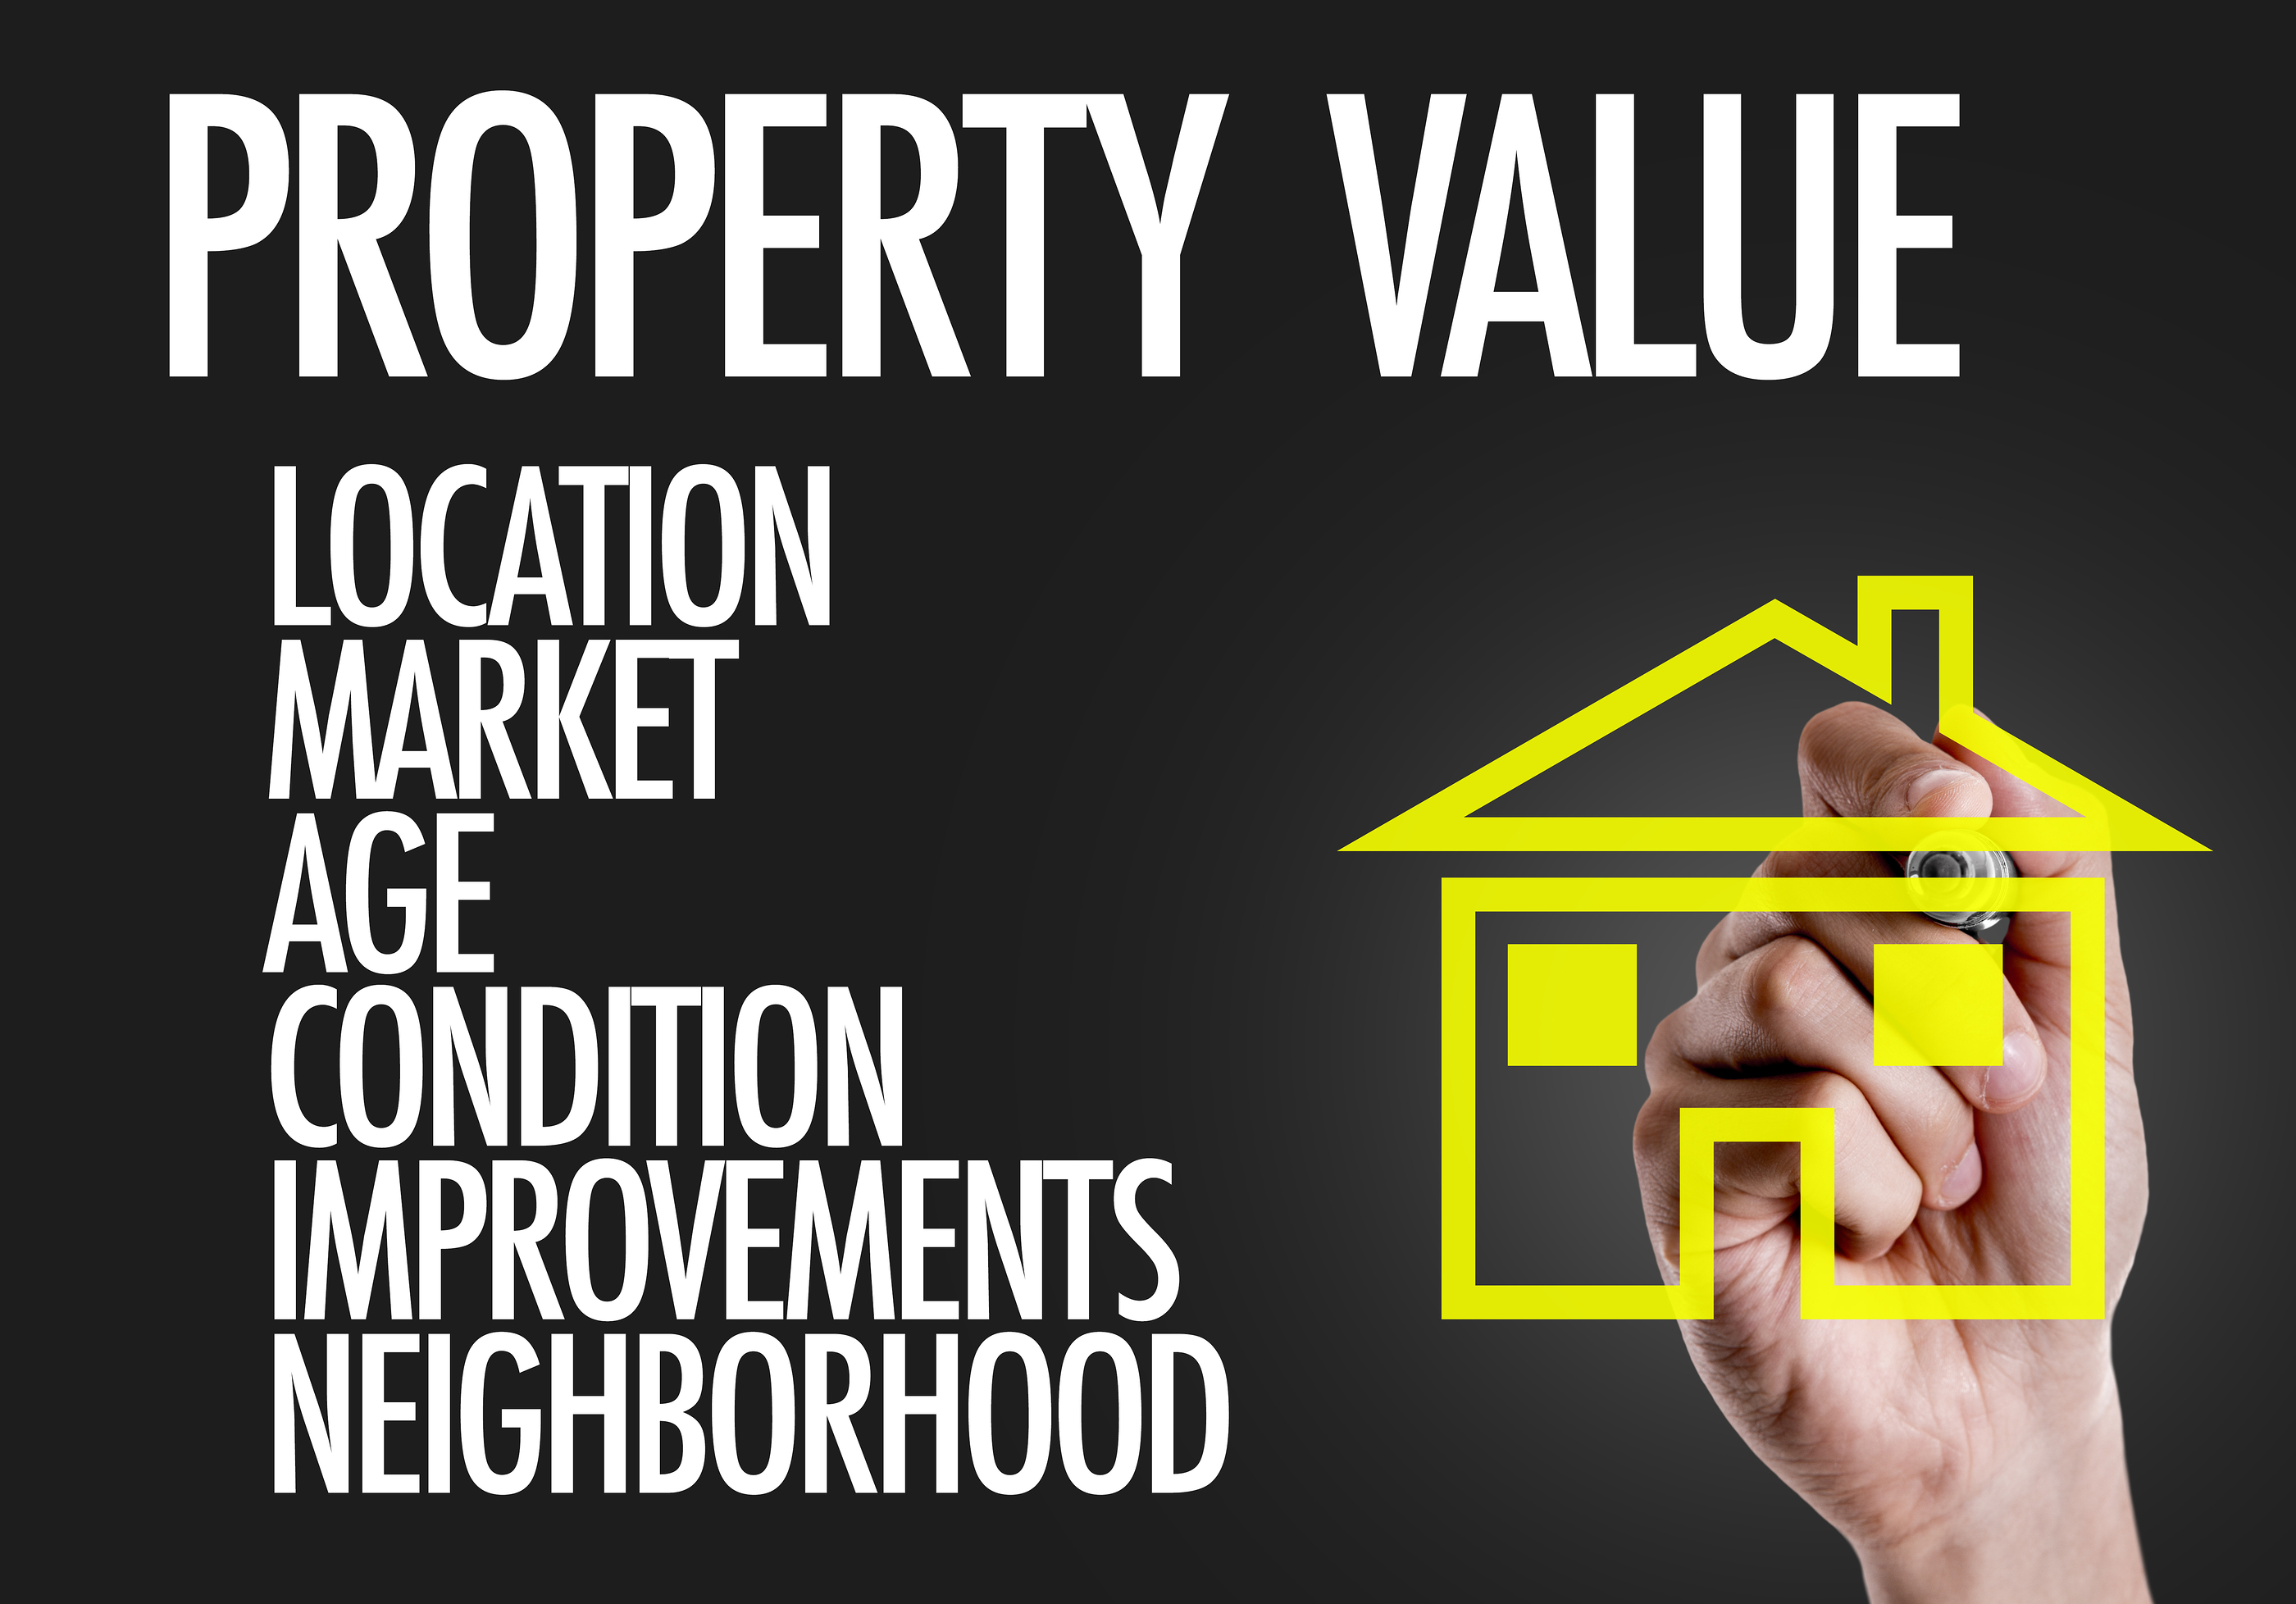 Hand writing the text: Property Value